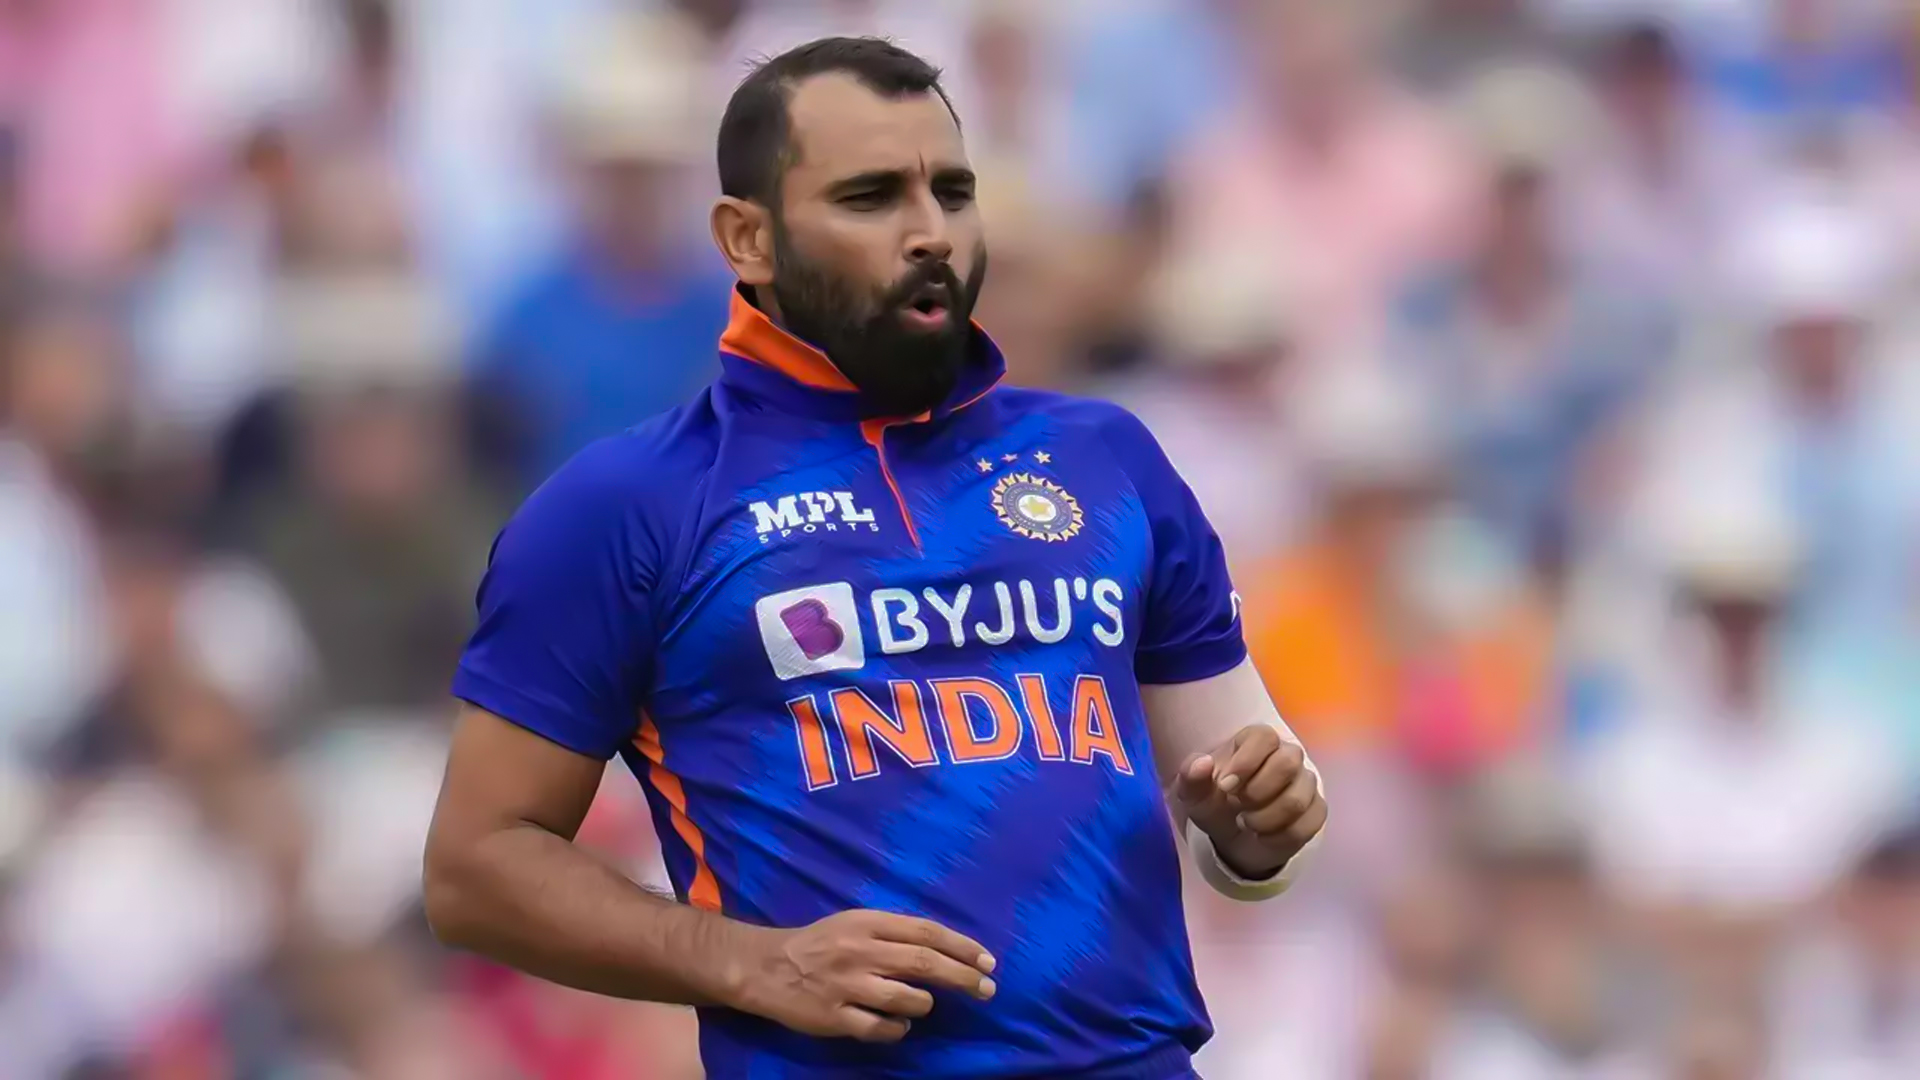 Big Relief For Mohammed Shami And Family, Cricketer Granted Bail In Domestic Violence Case